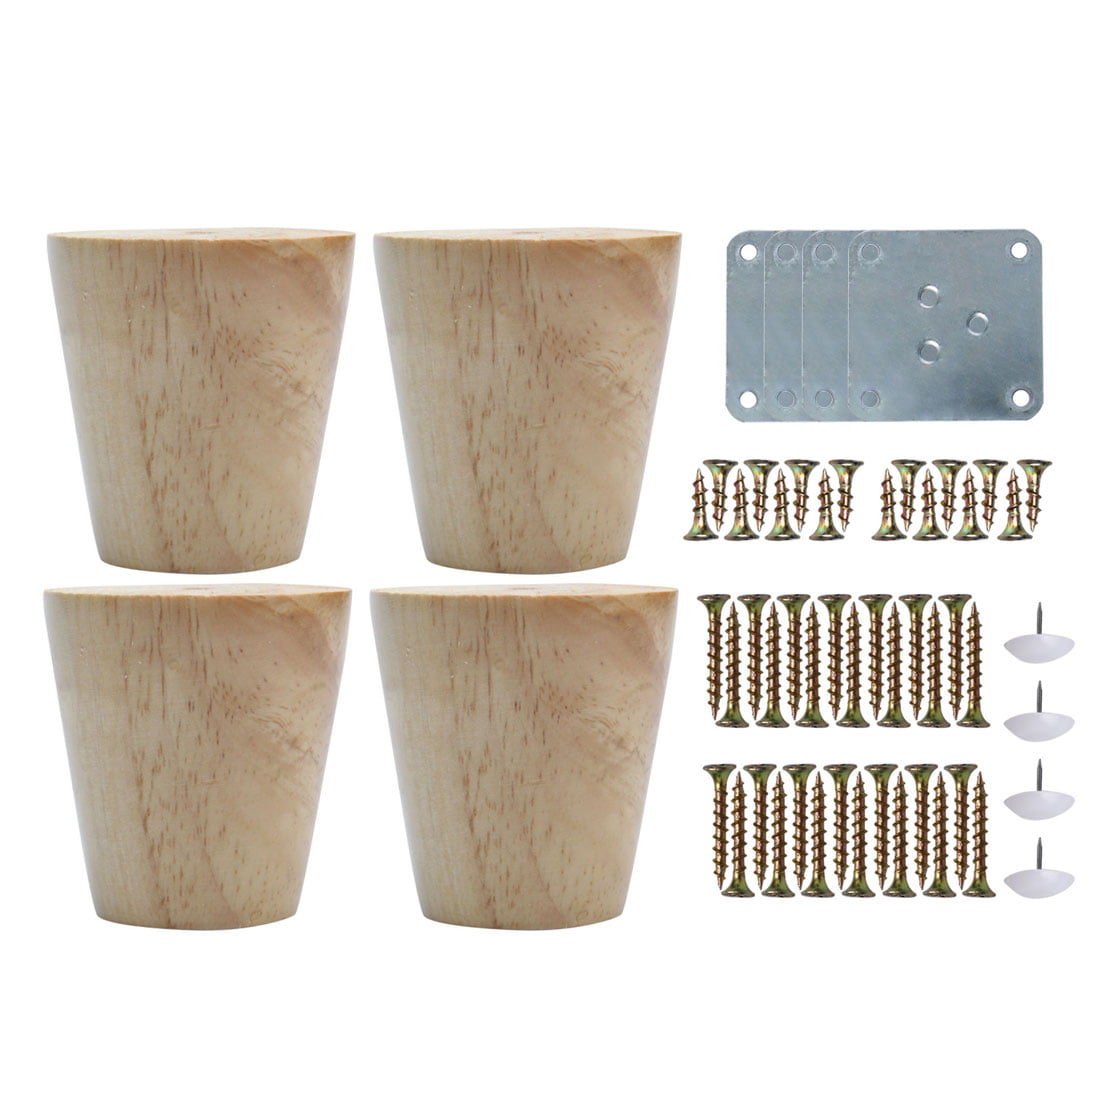 Details about   Round Solid Wood Furniture Leg Cabinet Feet Adjuster Replacement Set of 4 